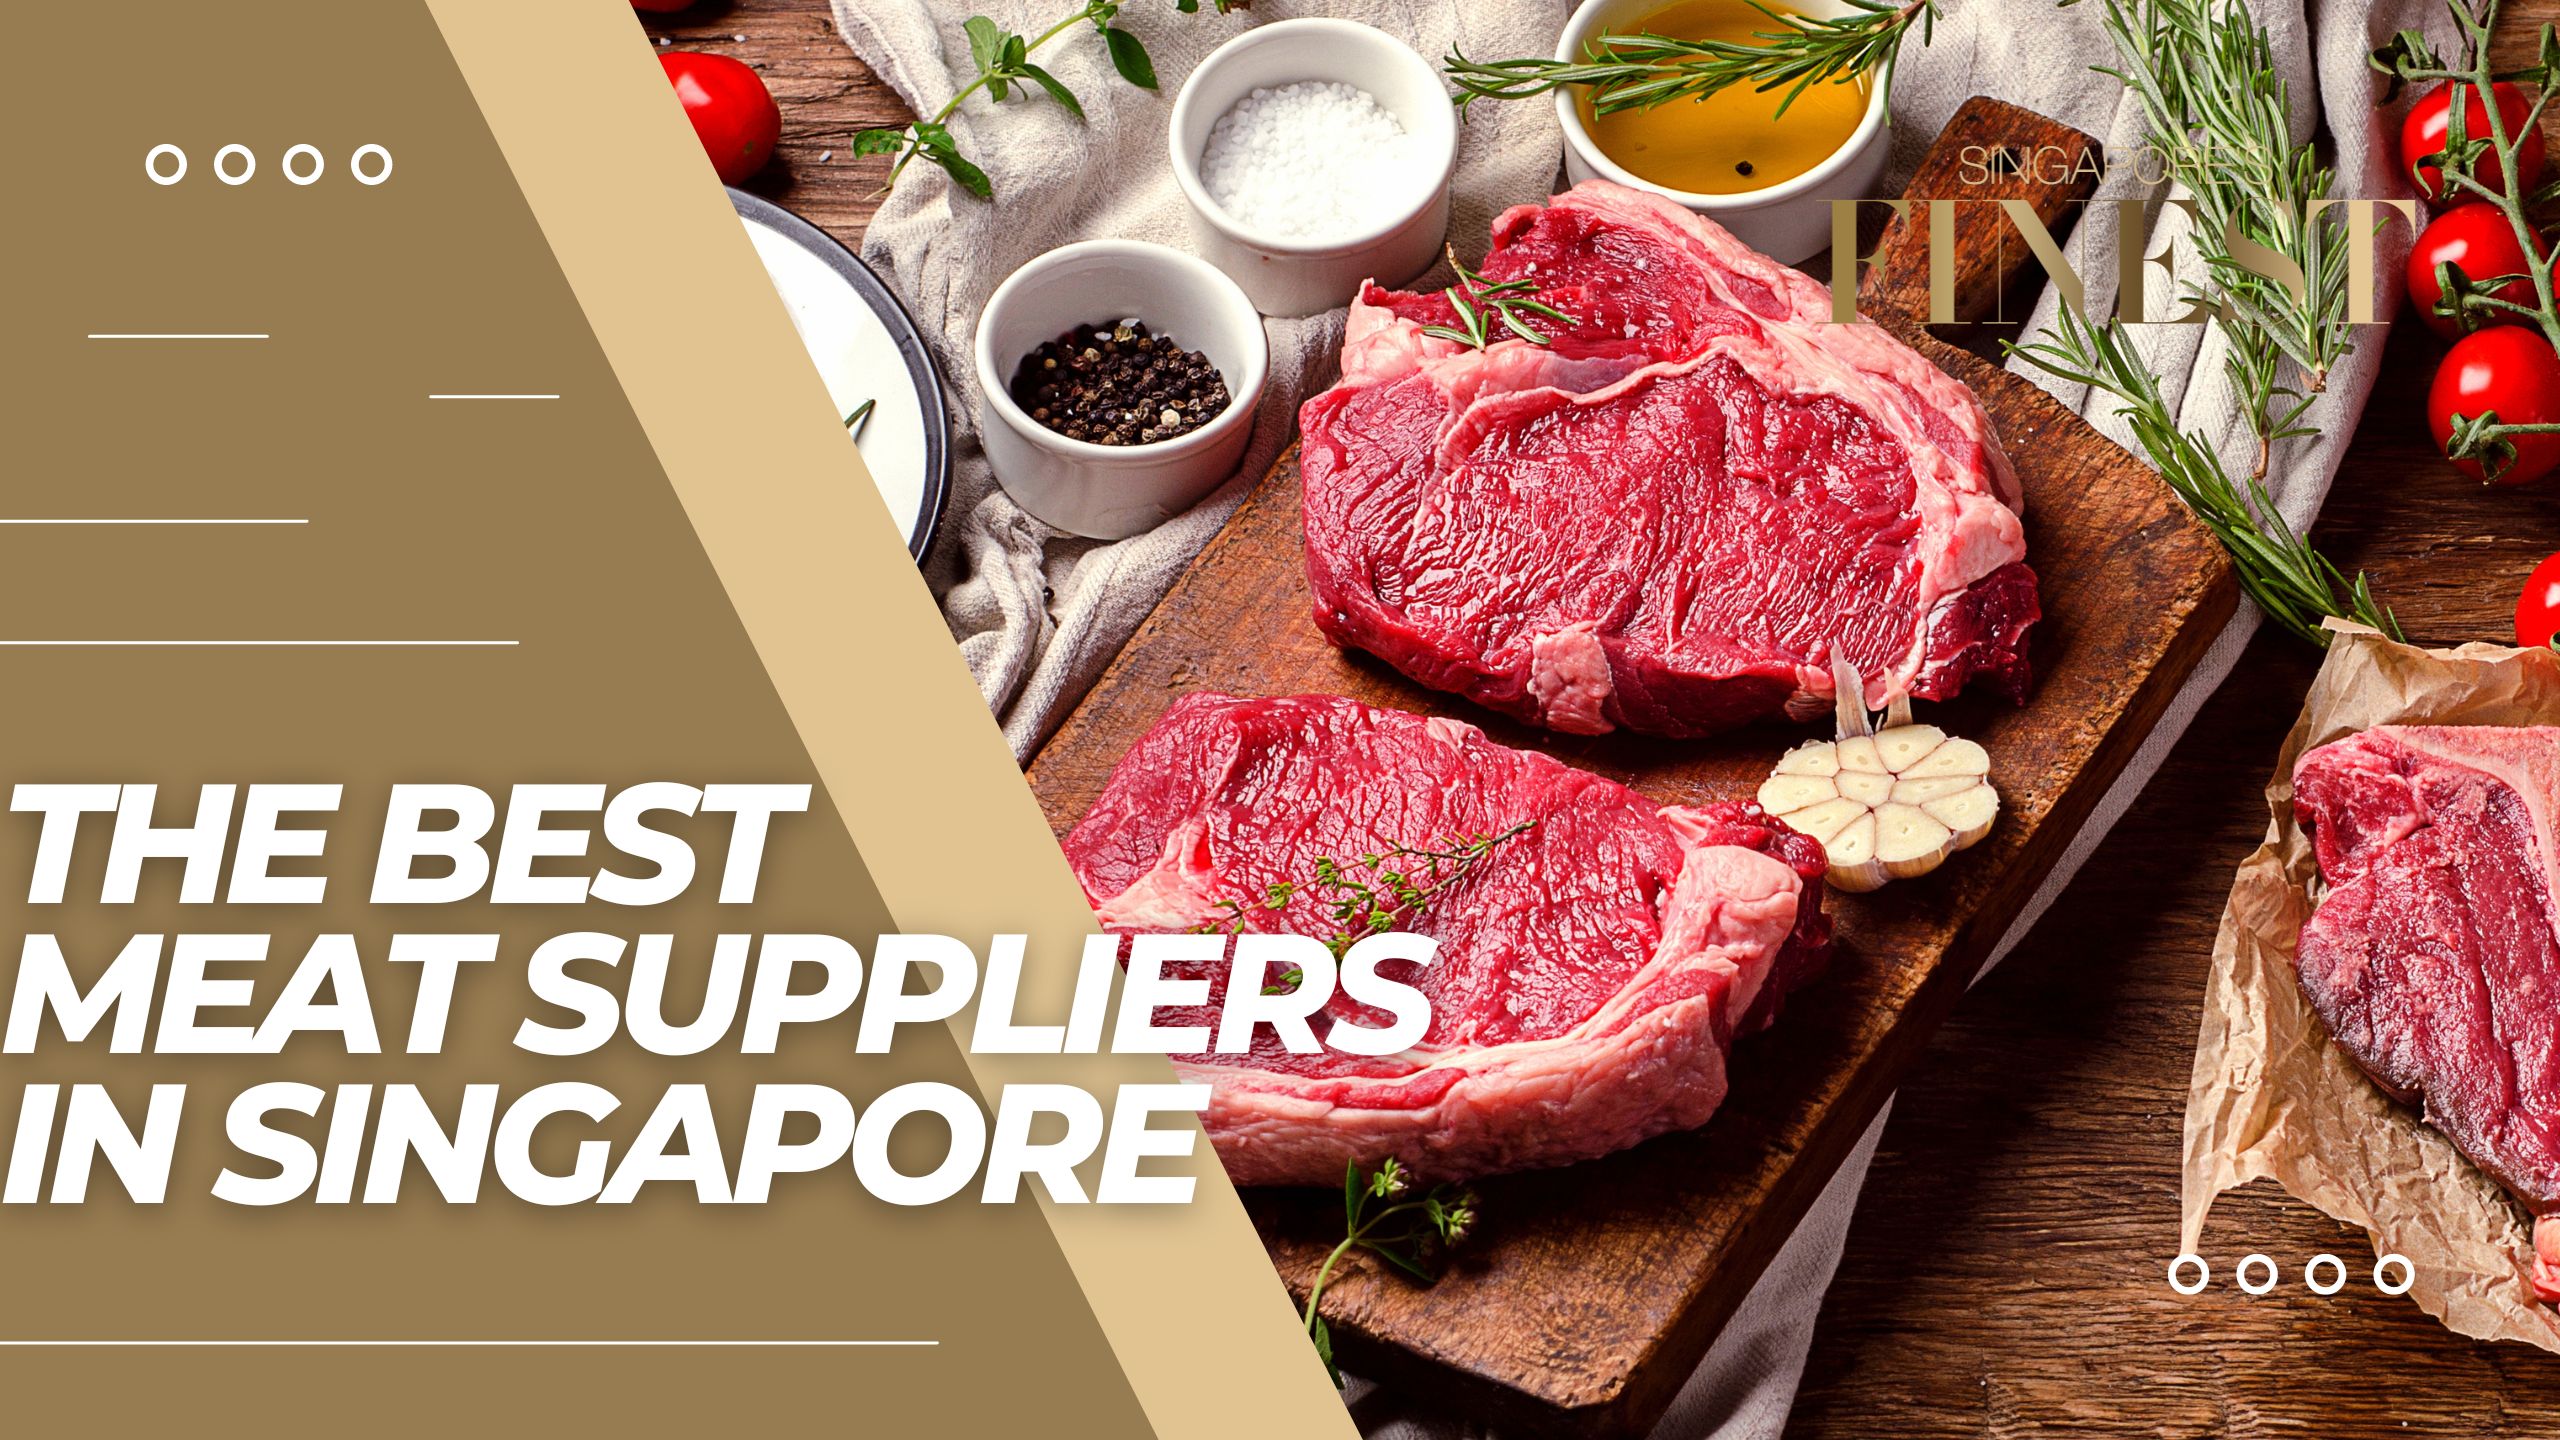 The Finest Meat Suppliers in Singapore